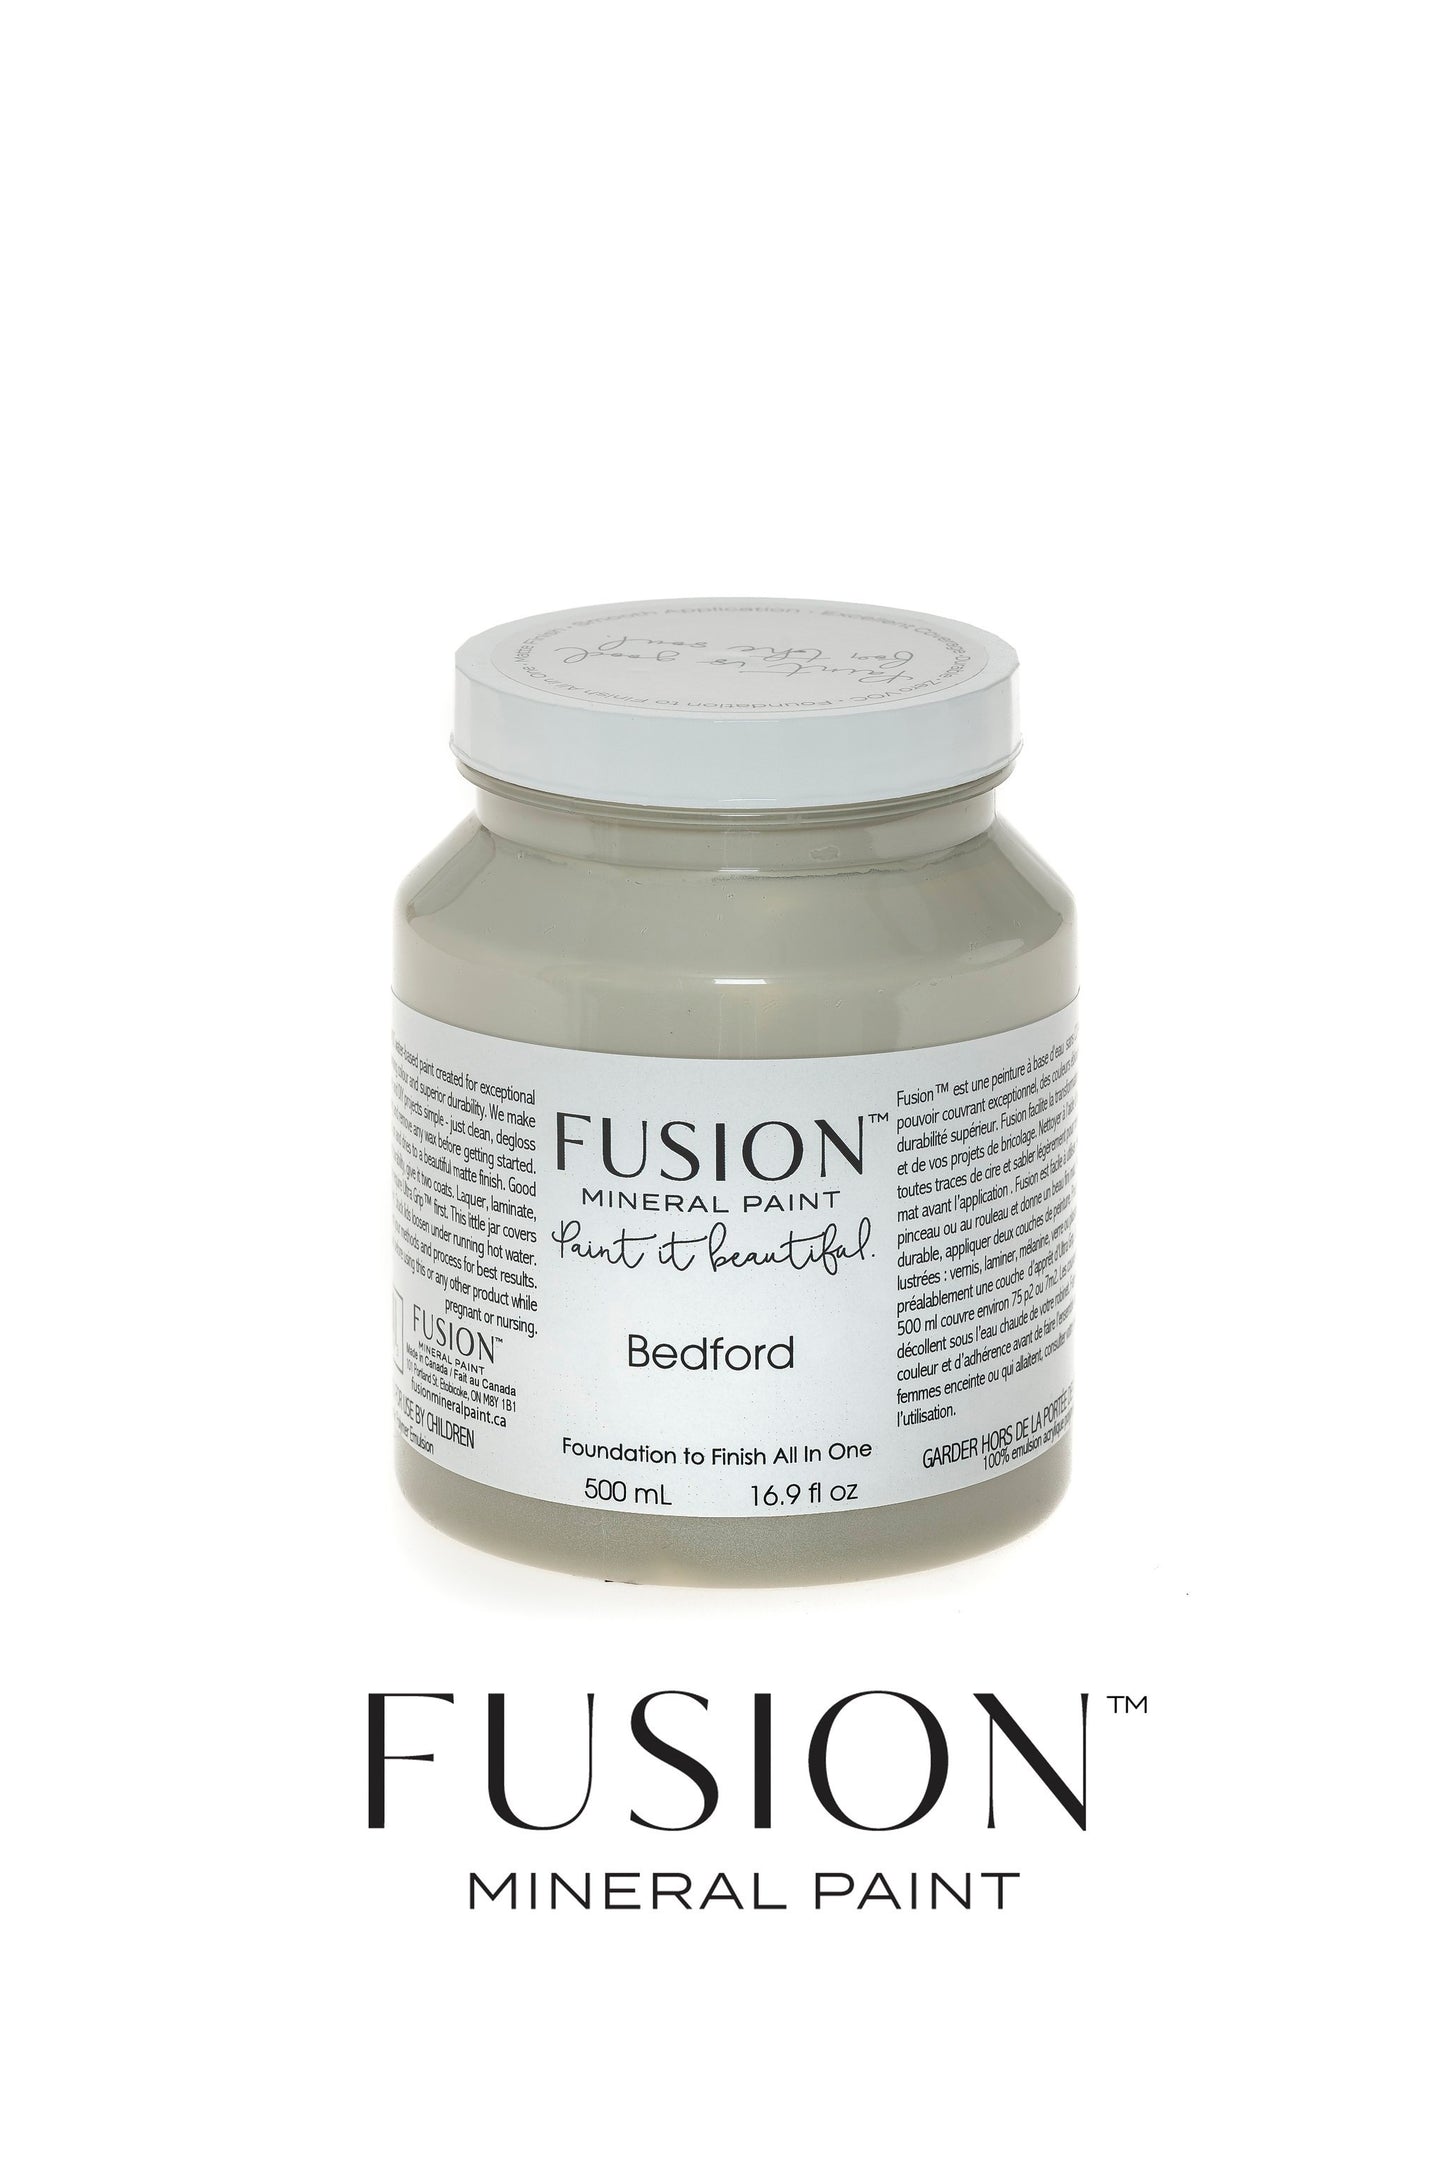 Bedford by Fusion